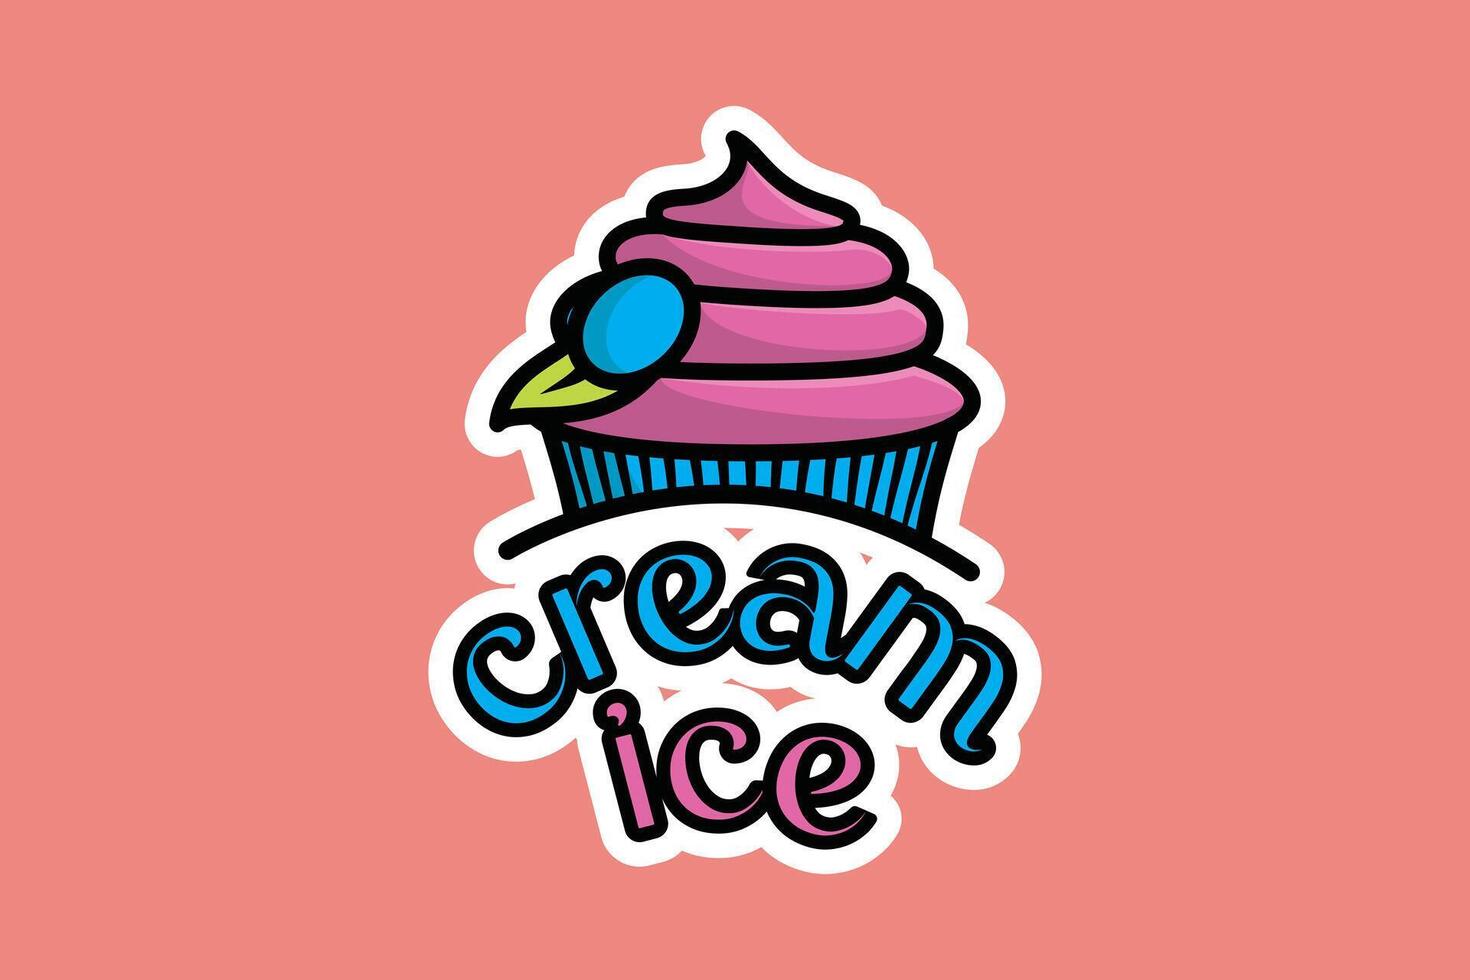 Summer Ice Cream Cup Sticker vector illustration. Summer food and ice cream object icon concept. Ice cream paper cup sticker vector design with shadow.